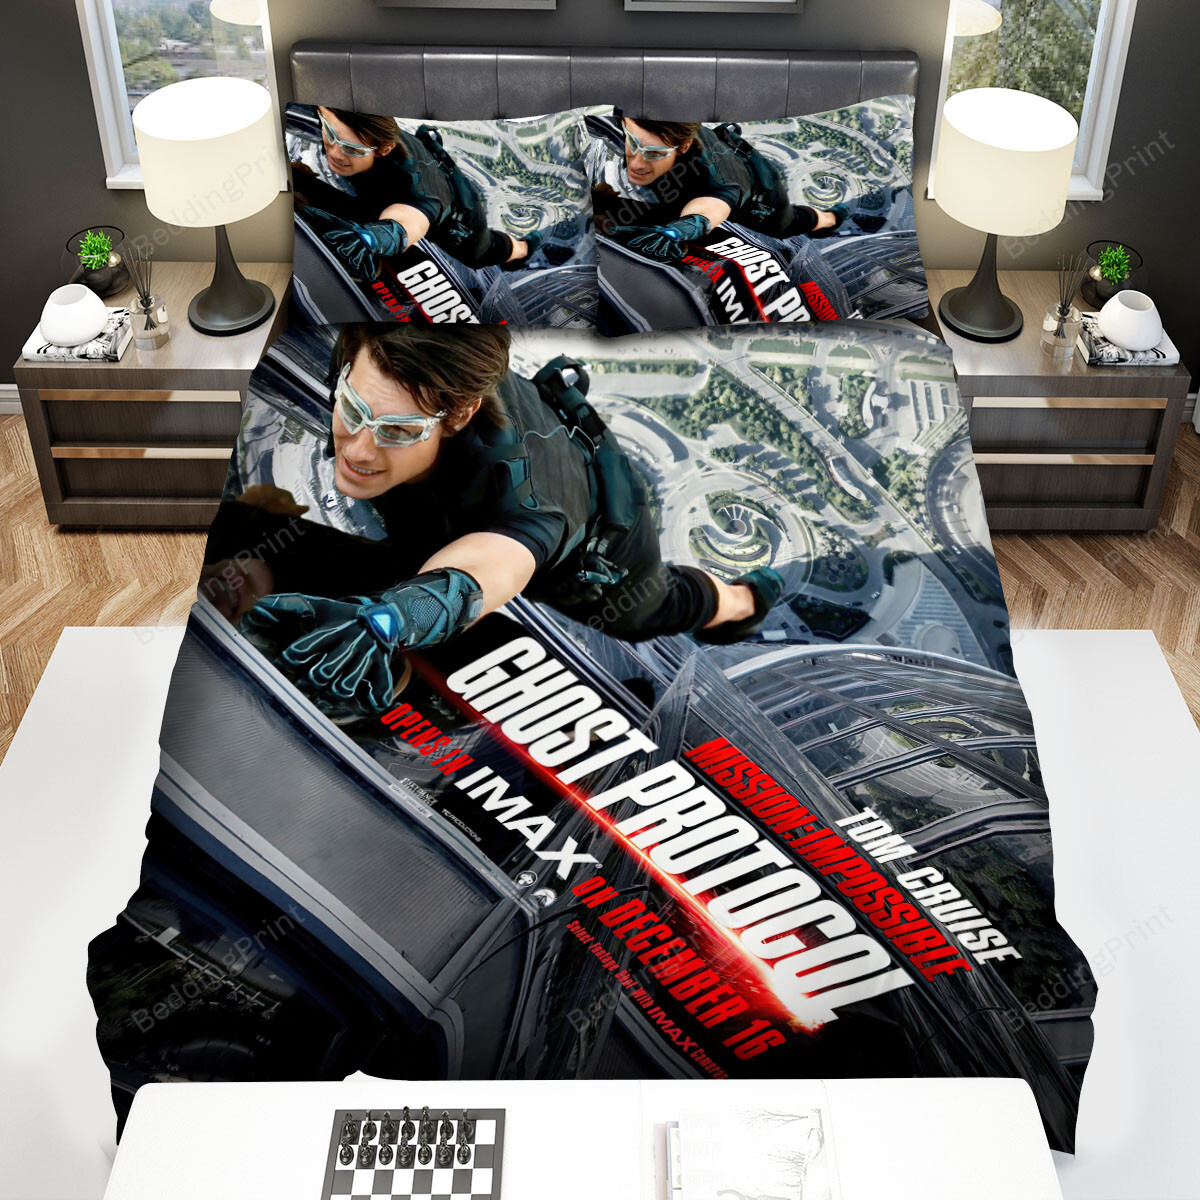 Mission Impossible - Ghost Protocol (2011) Climbing Movie Poster Bed Sheets Spread Comforter Duvet Cover Bedding Sets